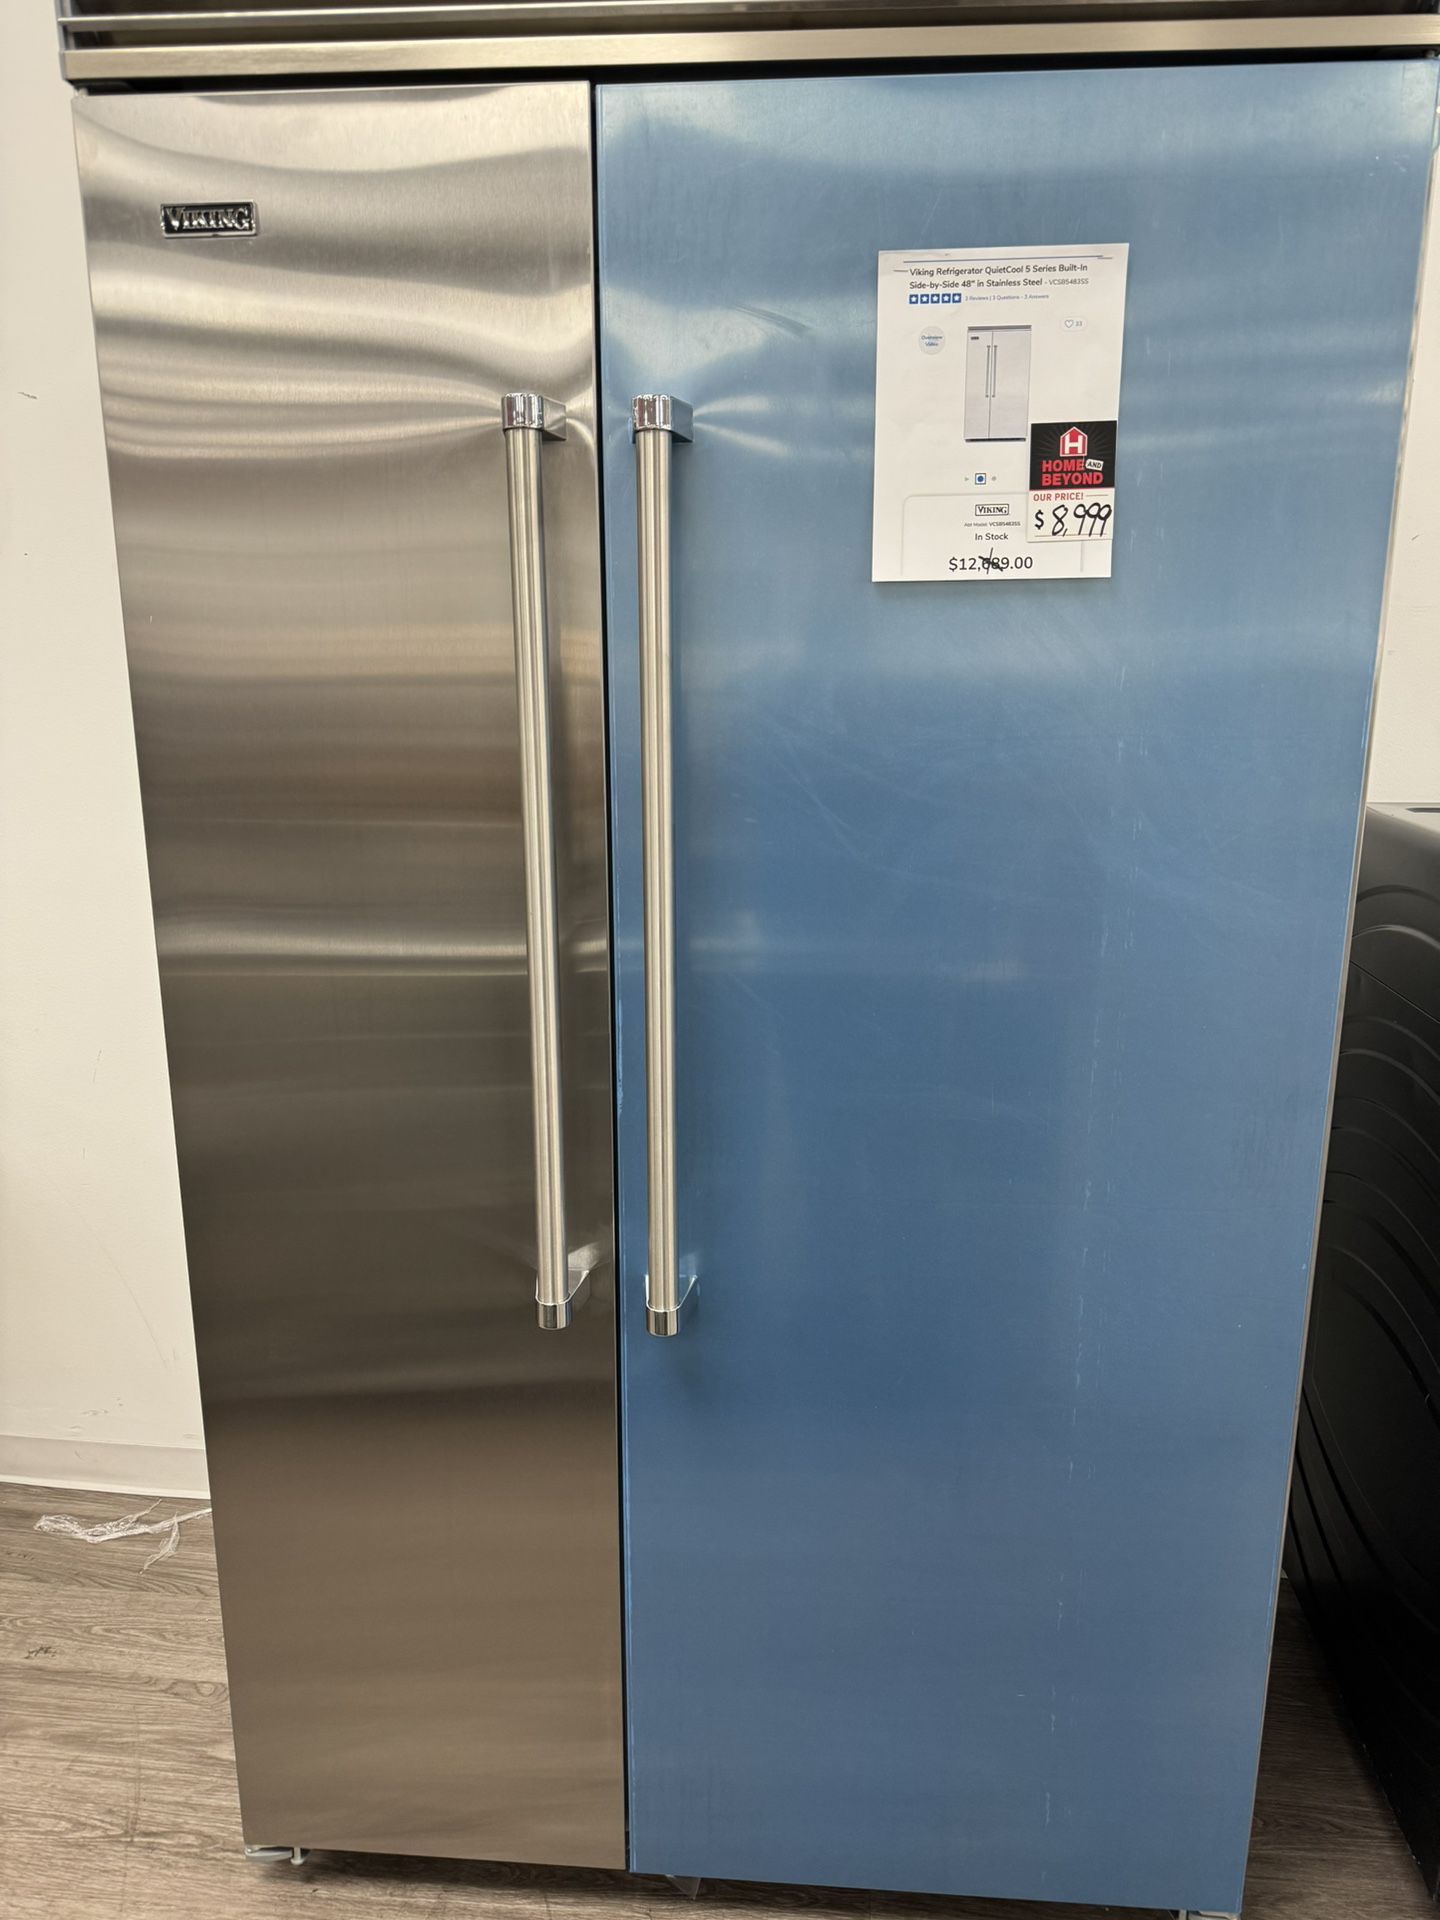 New Floor Model Viking Refrigerator QuietCool 5 Series Built-In Side-by-Side 48" in Stainless Steel - VCSB5483SS  5 